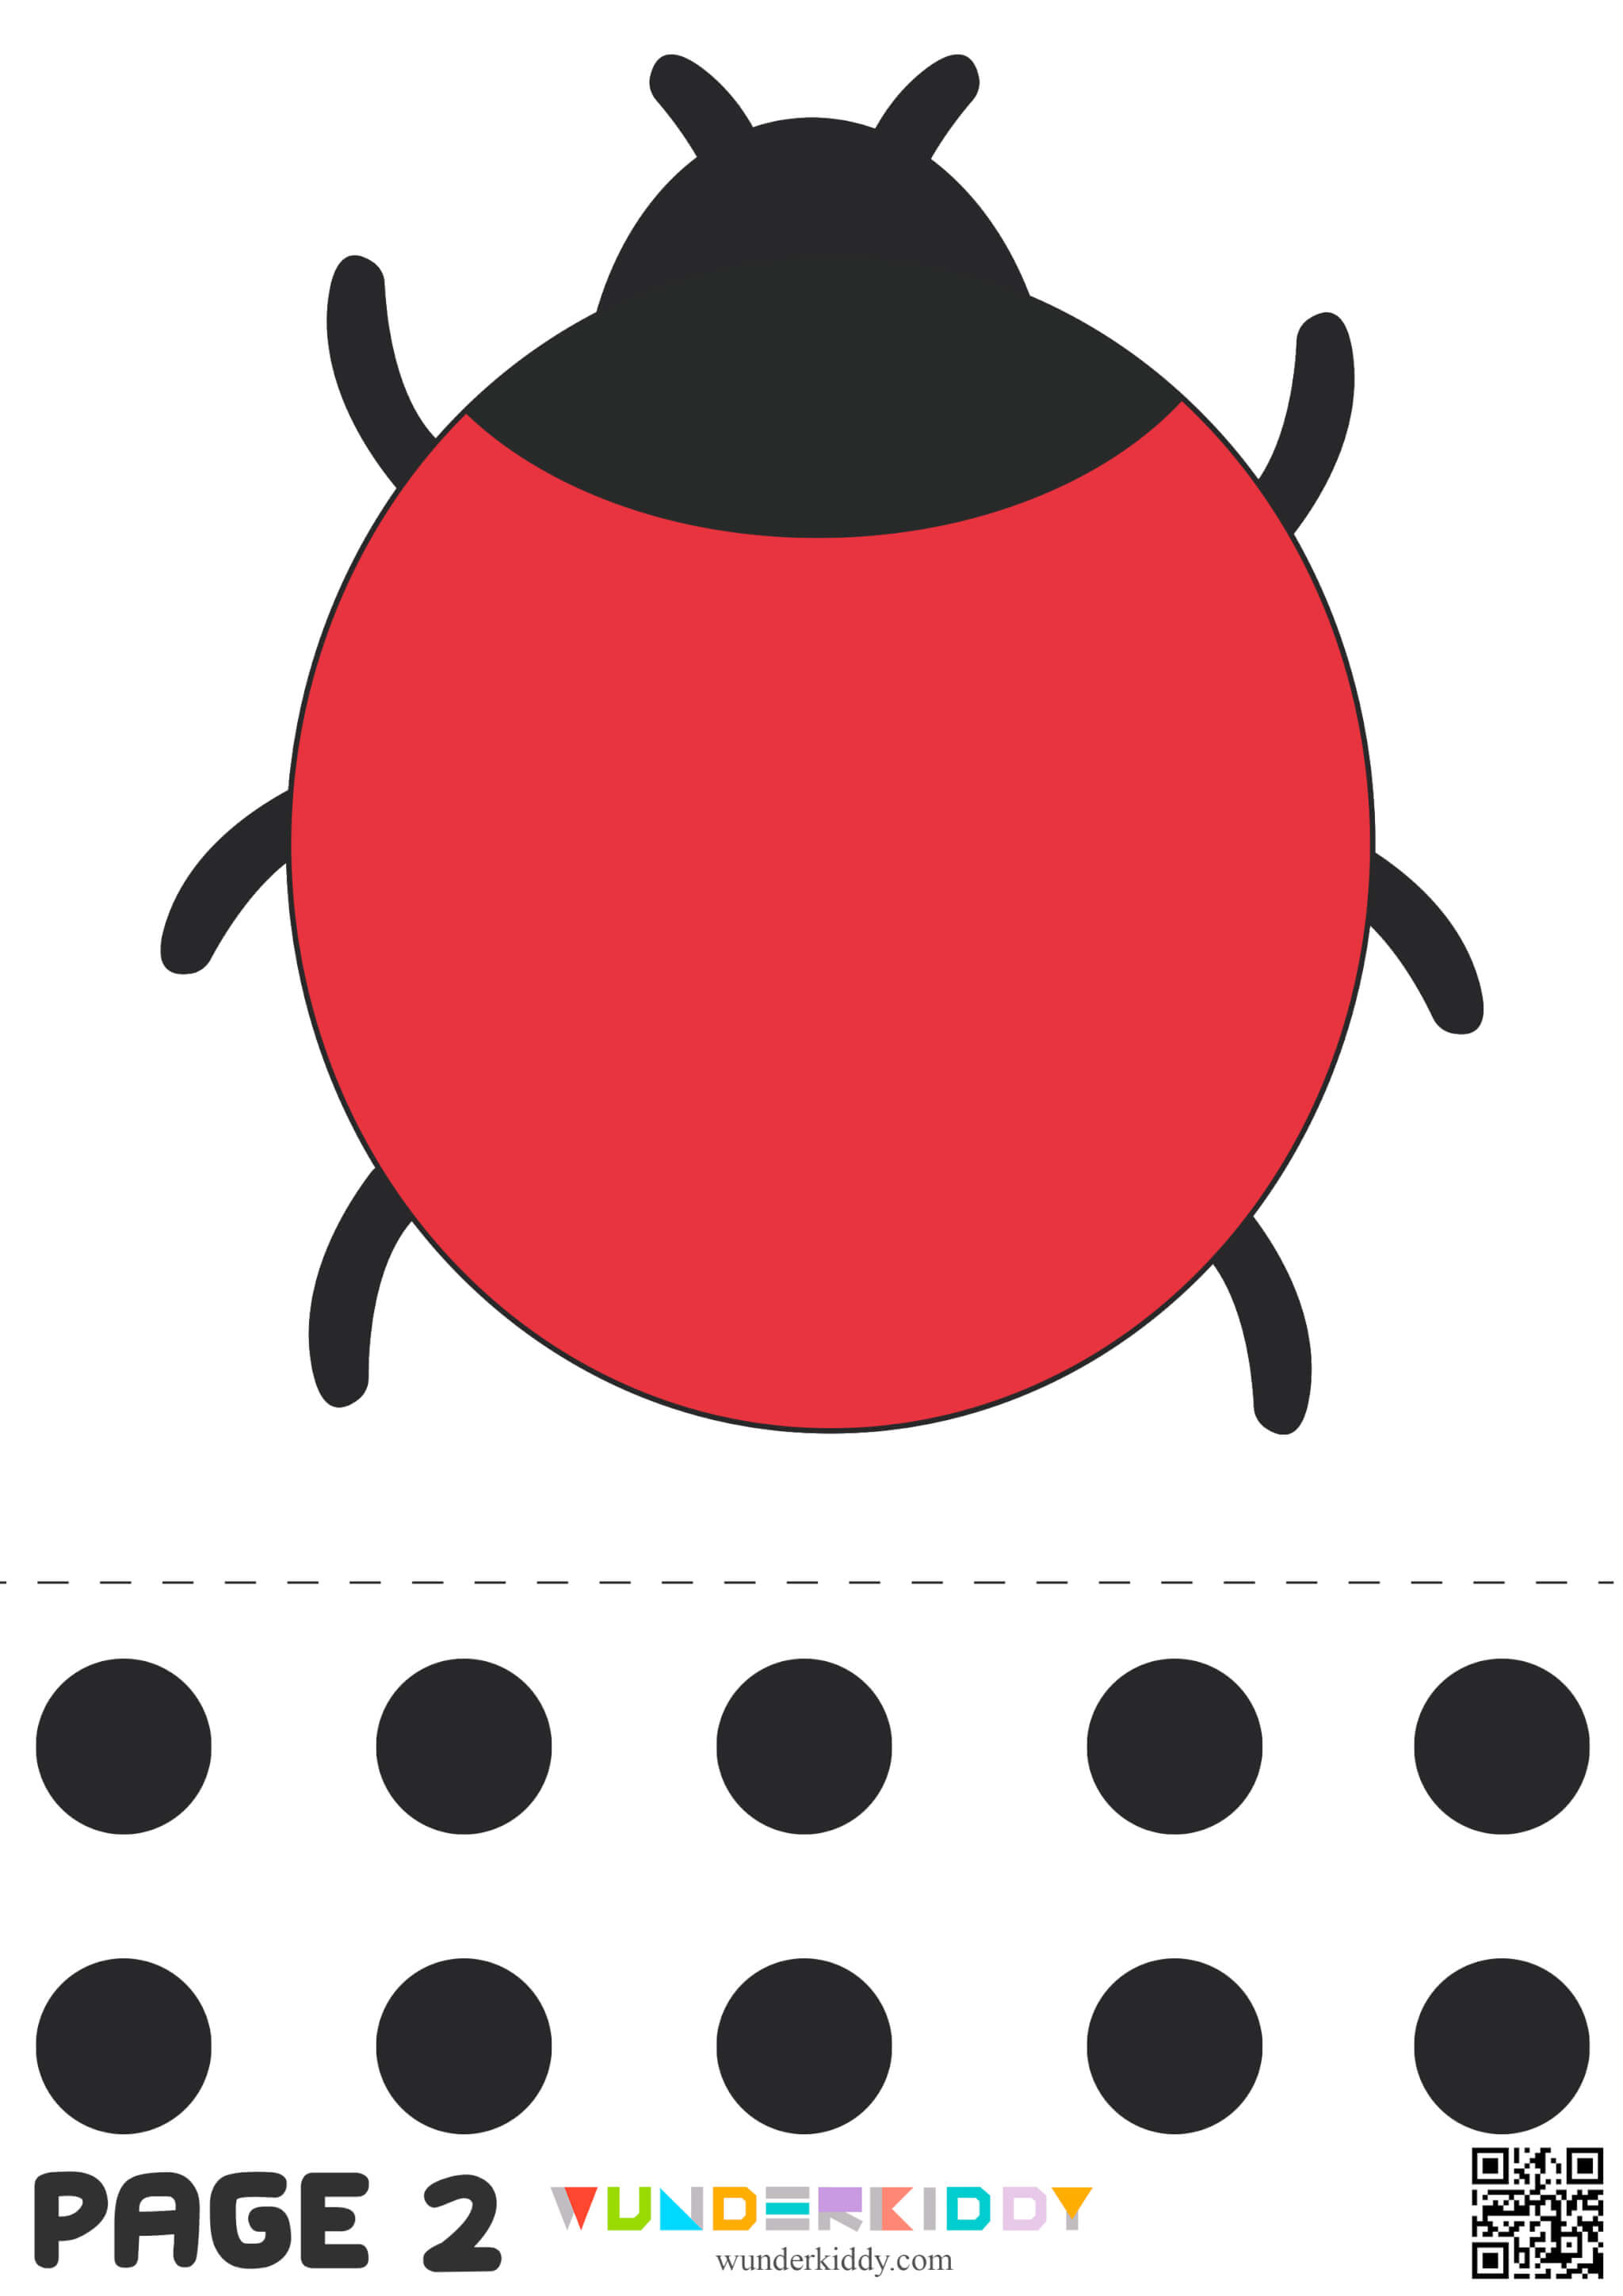 Ladybug Activity and Templates for Kids - Image 3